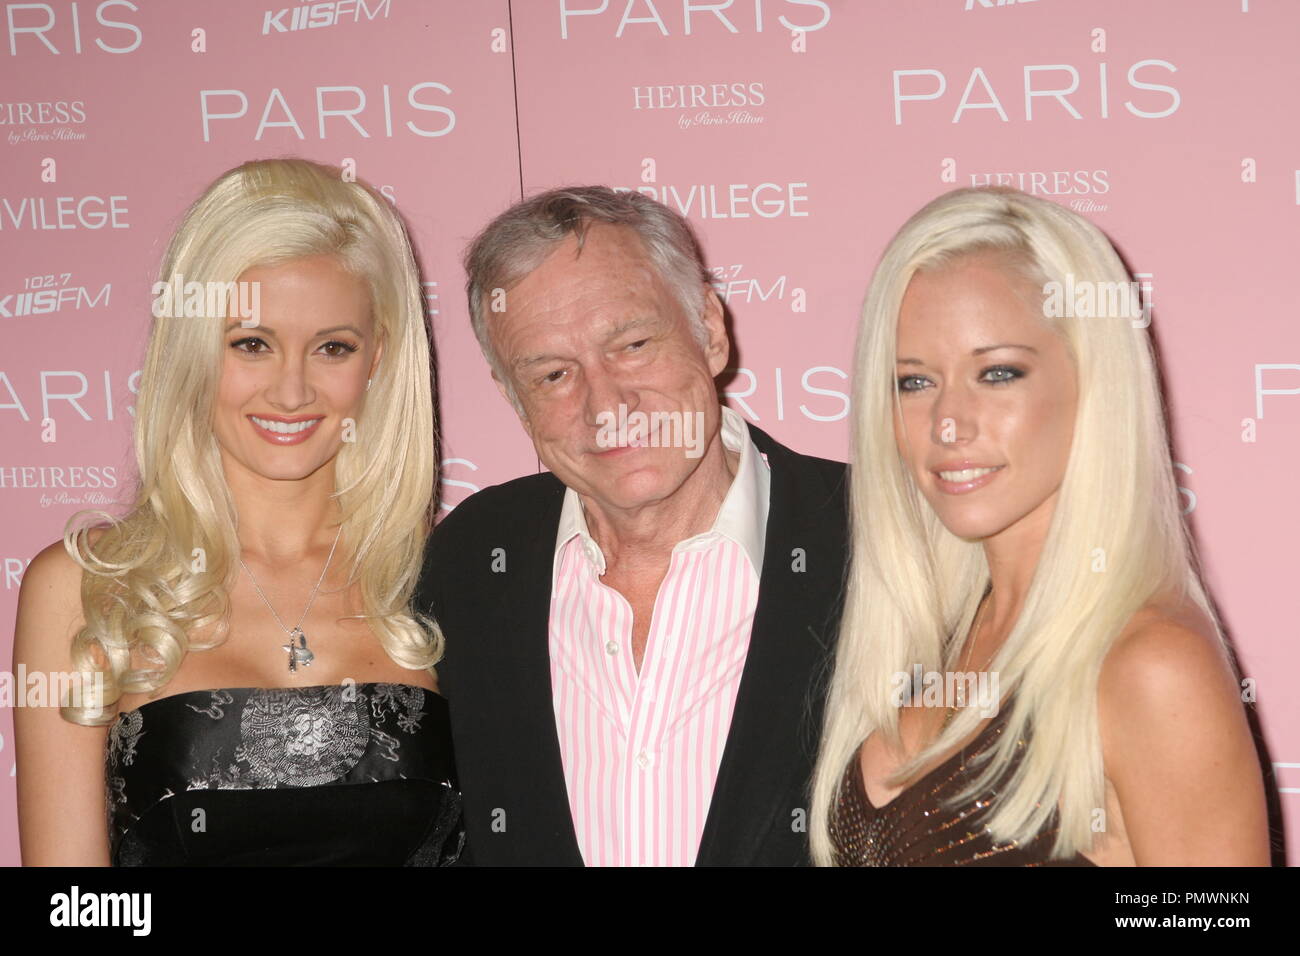 Playboy founder Hugh Hefner and his dates, Holly Madison (left) and Kendra Wilkinson 08/18/06 'Paris Hilton Album Release Party' @Privilege, West Hollywood Photo by Ima Kuroda/HNW / PictureLux File Reference # 32012 014HNW  For Editorial Use Only -  All Rights Reserved Stock Photo